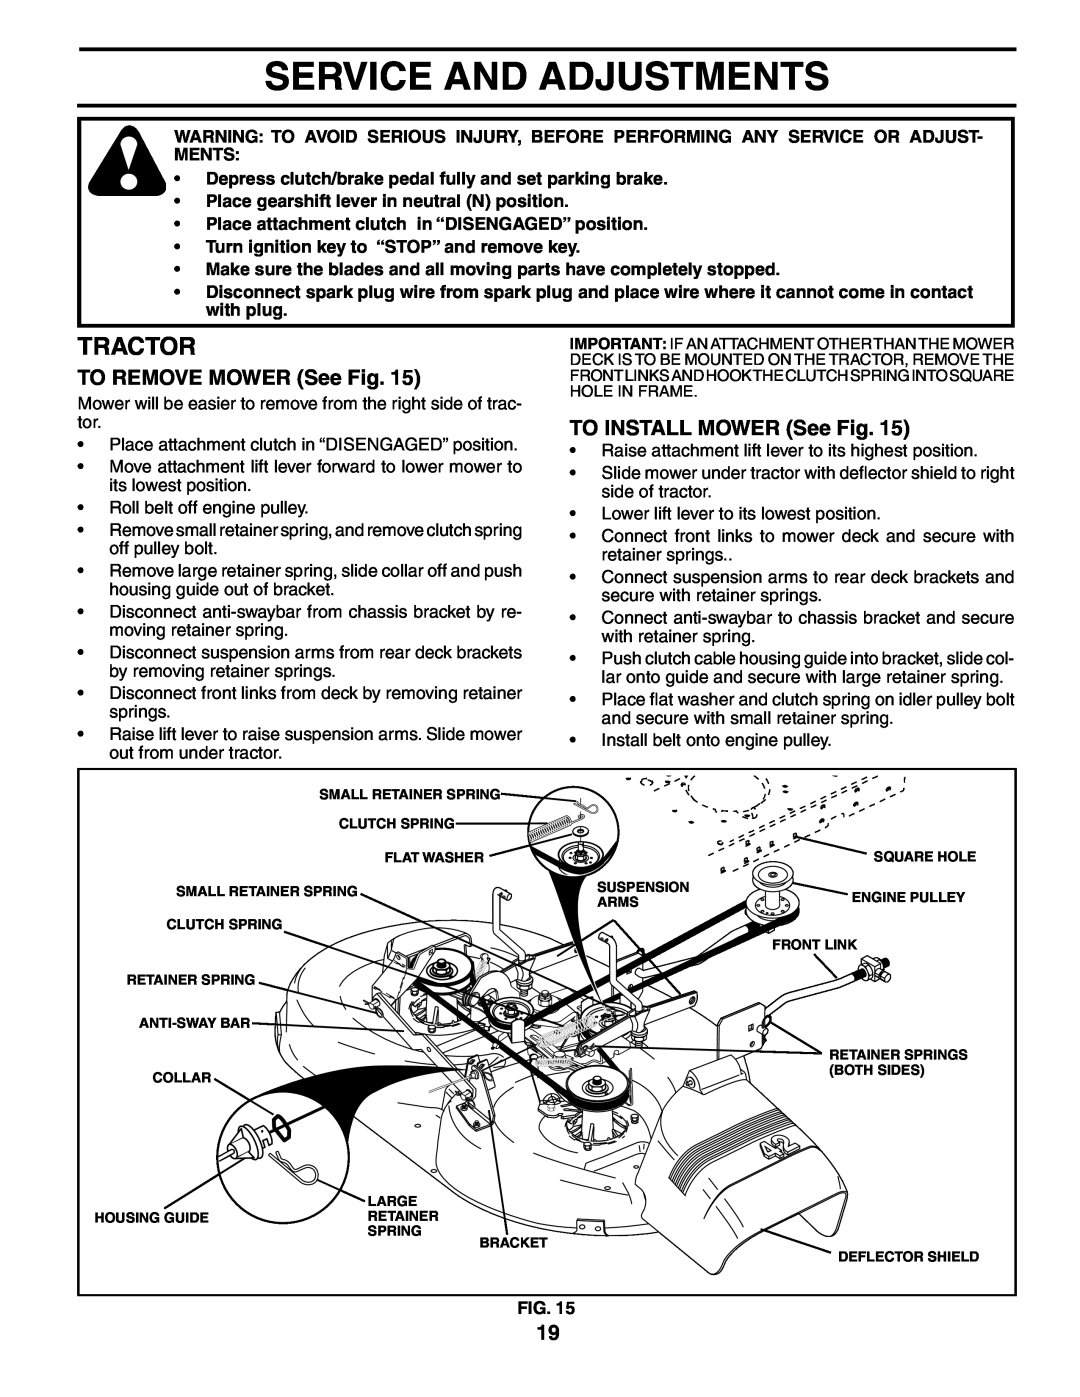 Poulan PK1942LT manual Service And Adjustments, TO REMOVE MOWER See Fig, TO INSTALL MOWER See Fig, Tractor 